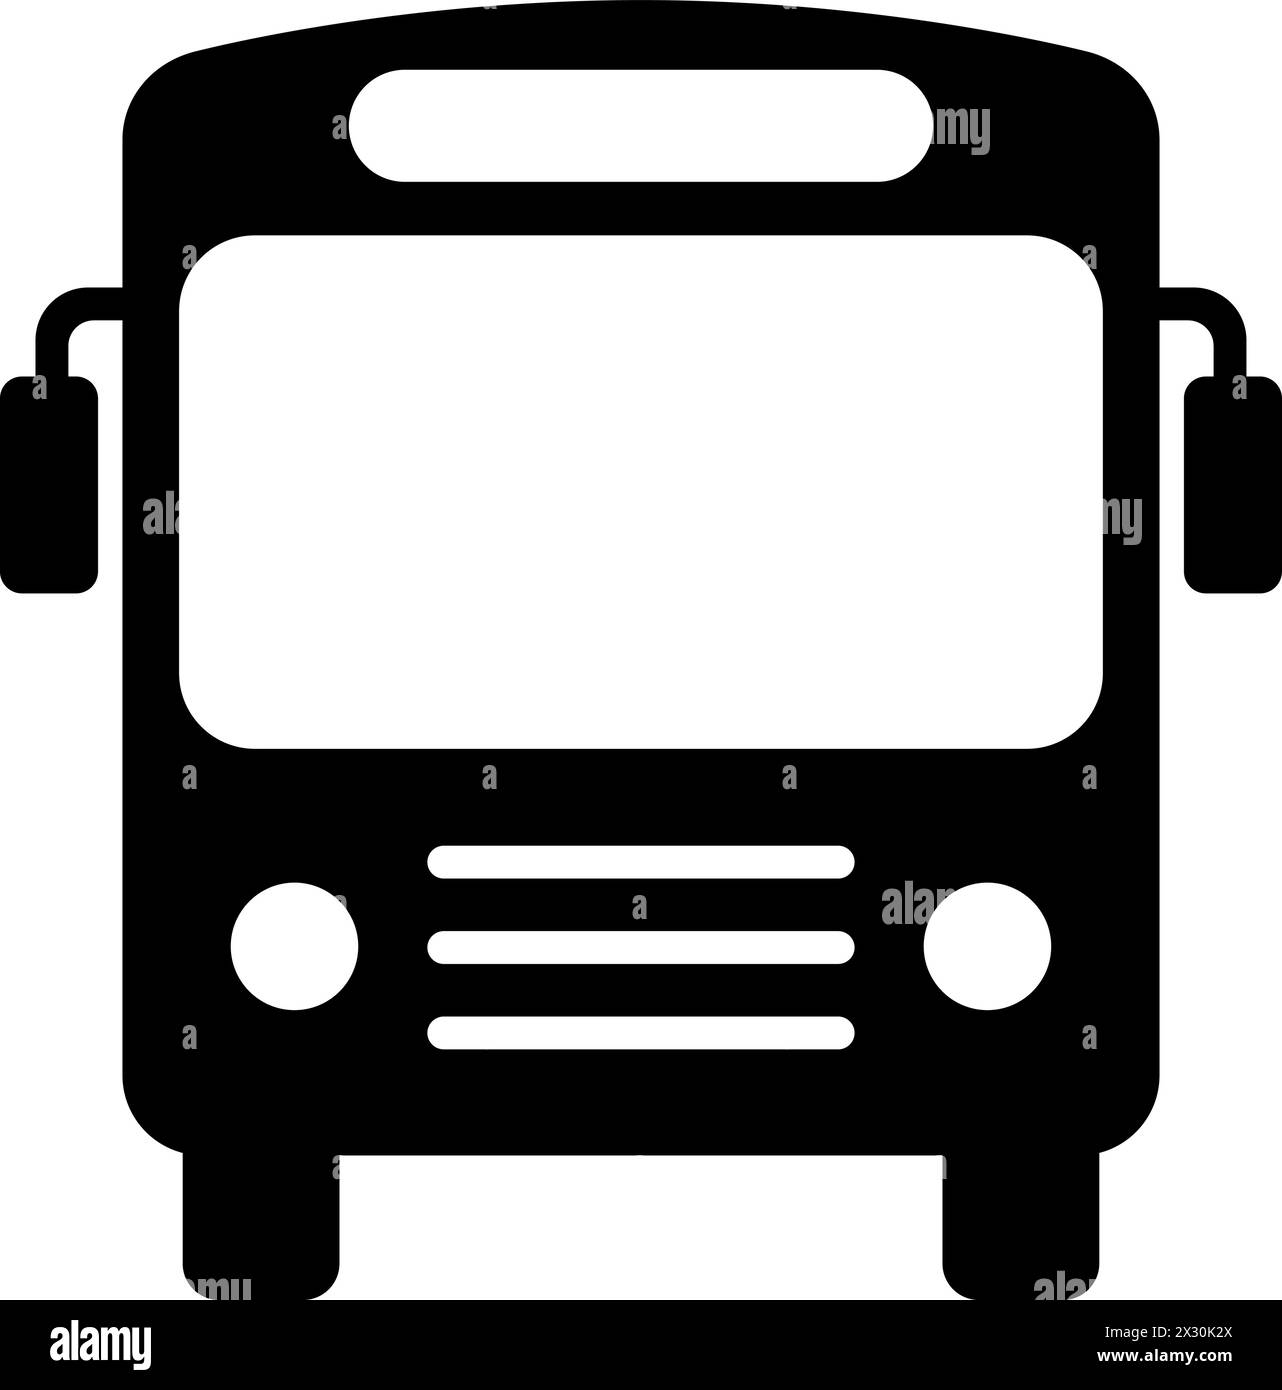 Flat bus icon as symbol for web page design of passenger transportation transport Stock Vector